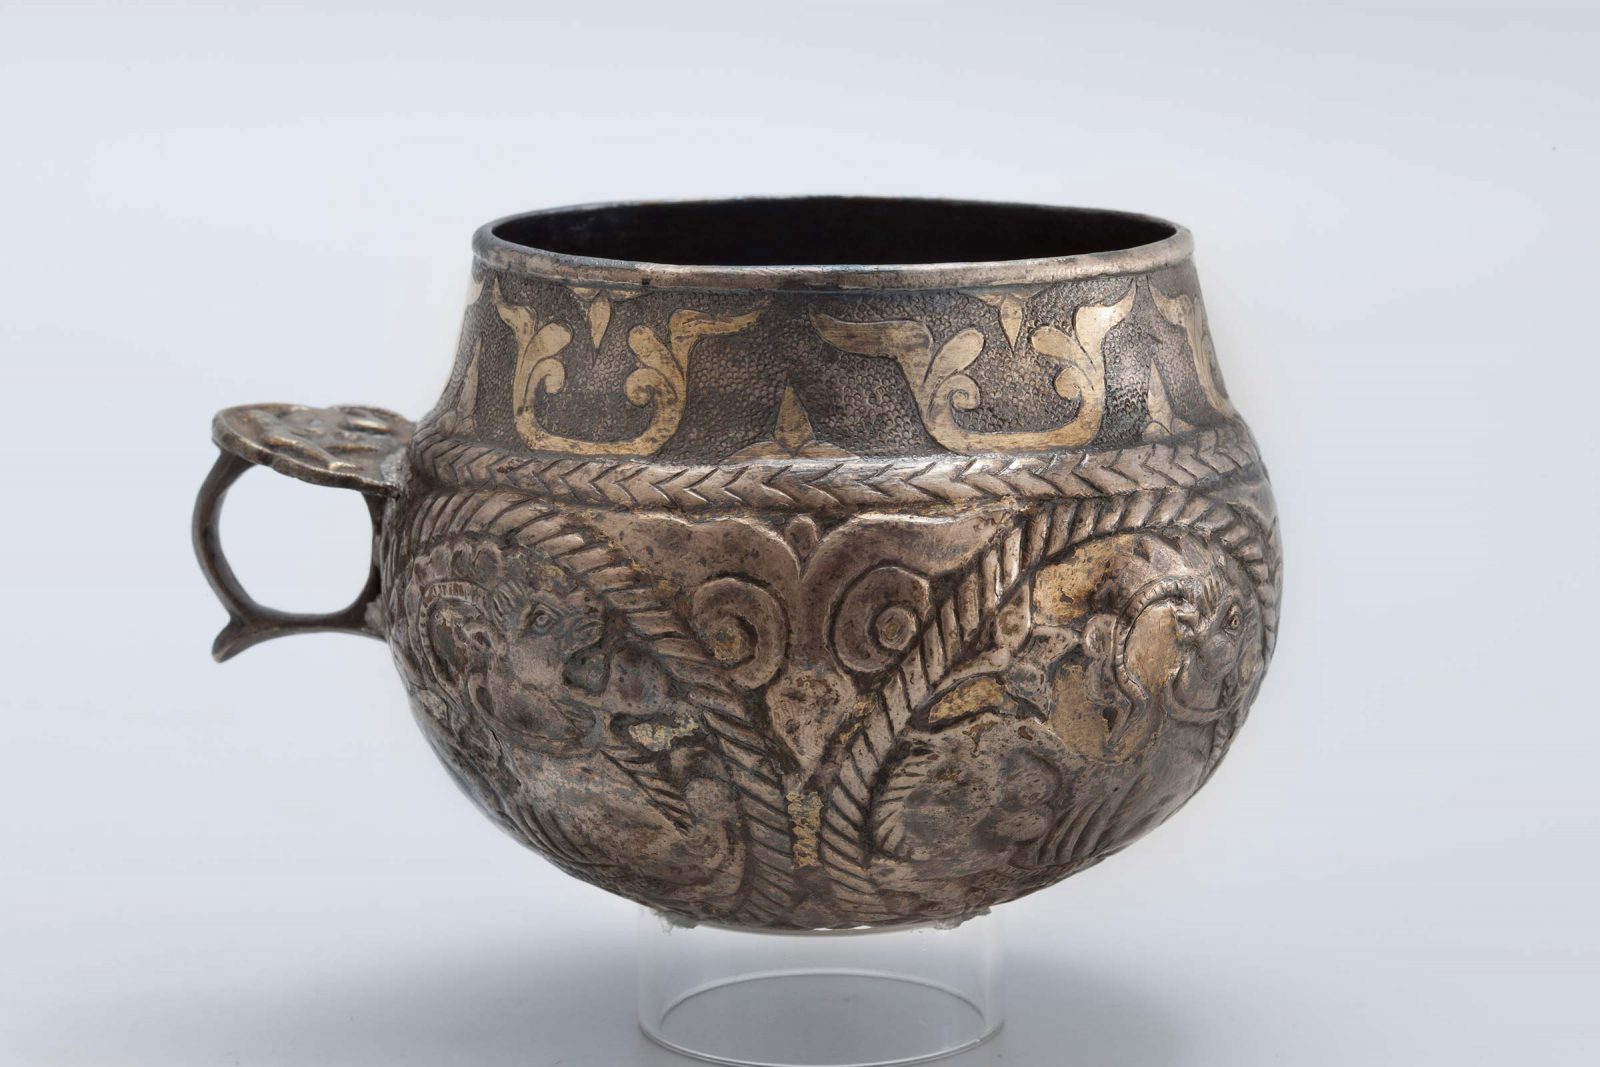 Spherical cup with ring handle. The body of the cup has roundels with goals and a vegetal motif at the rim.